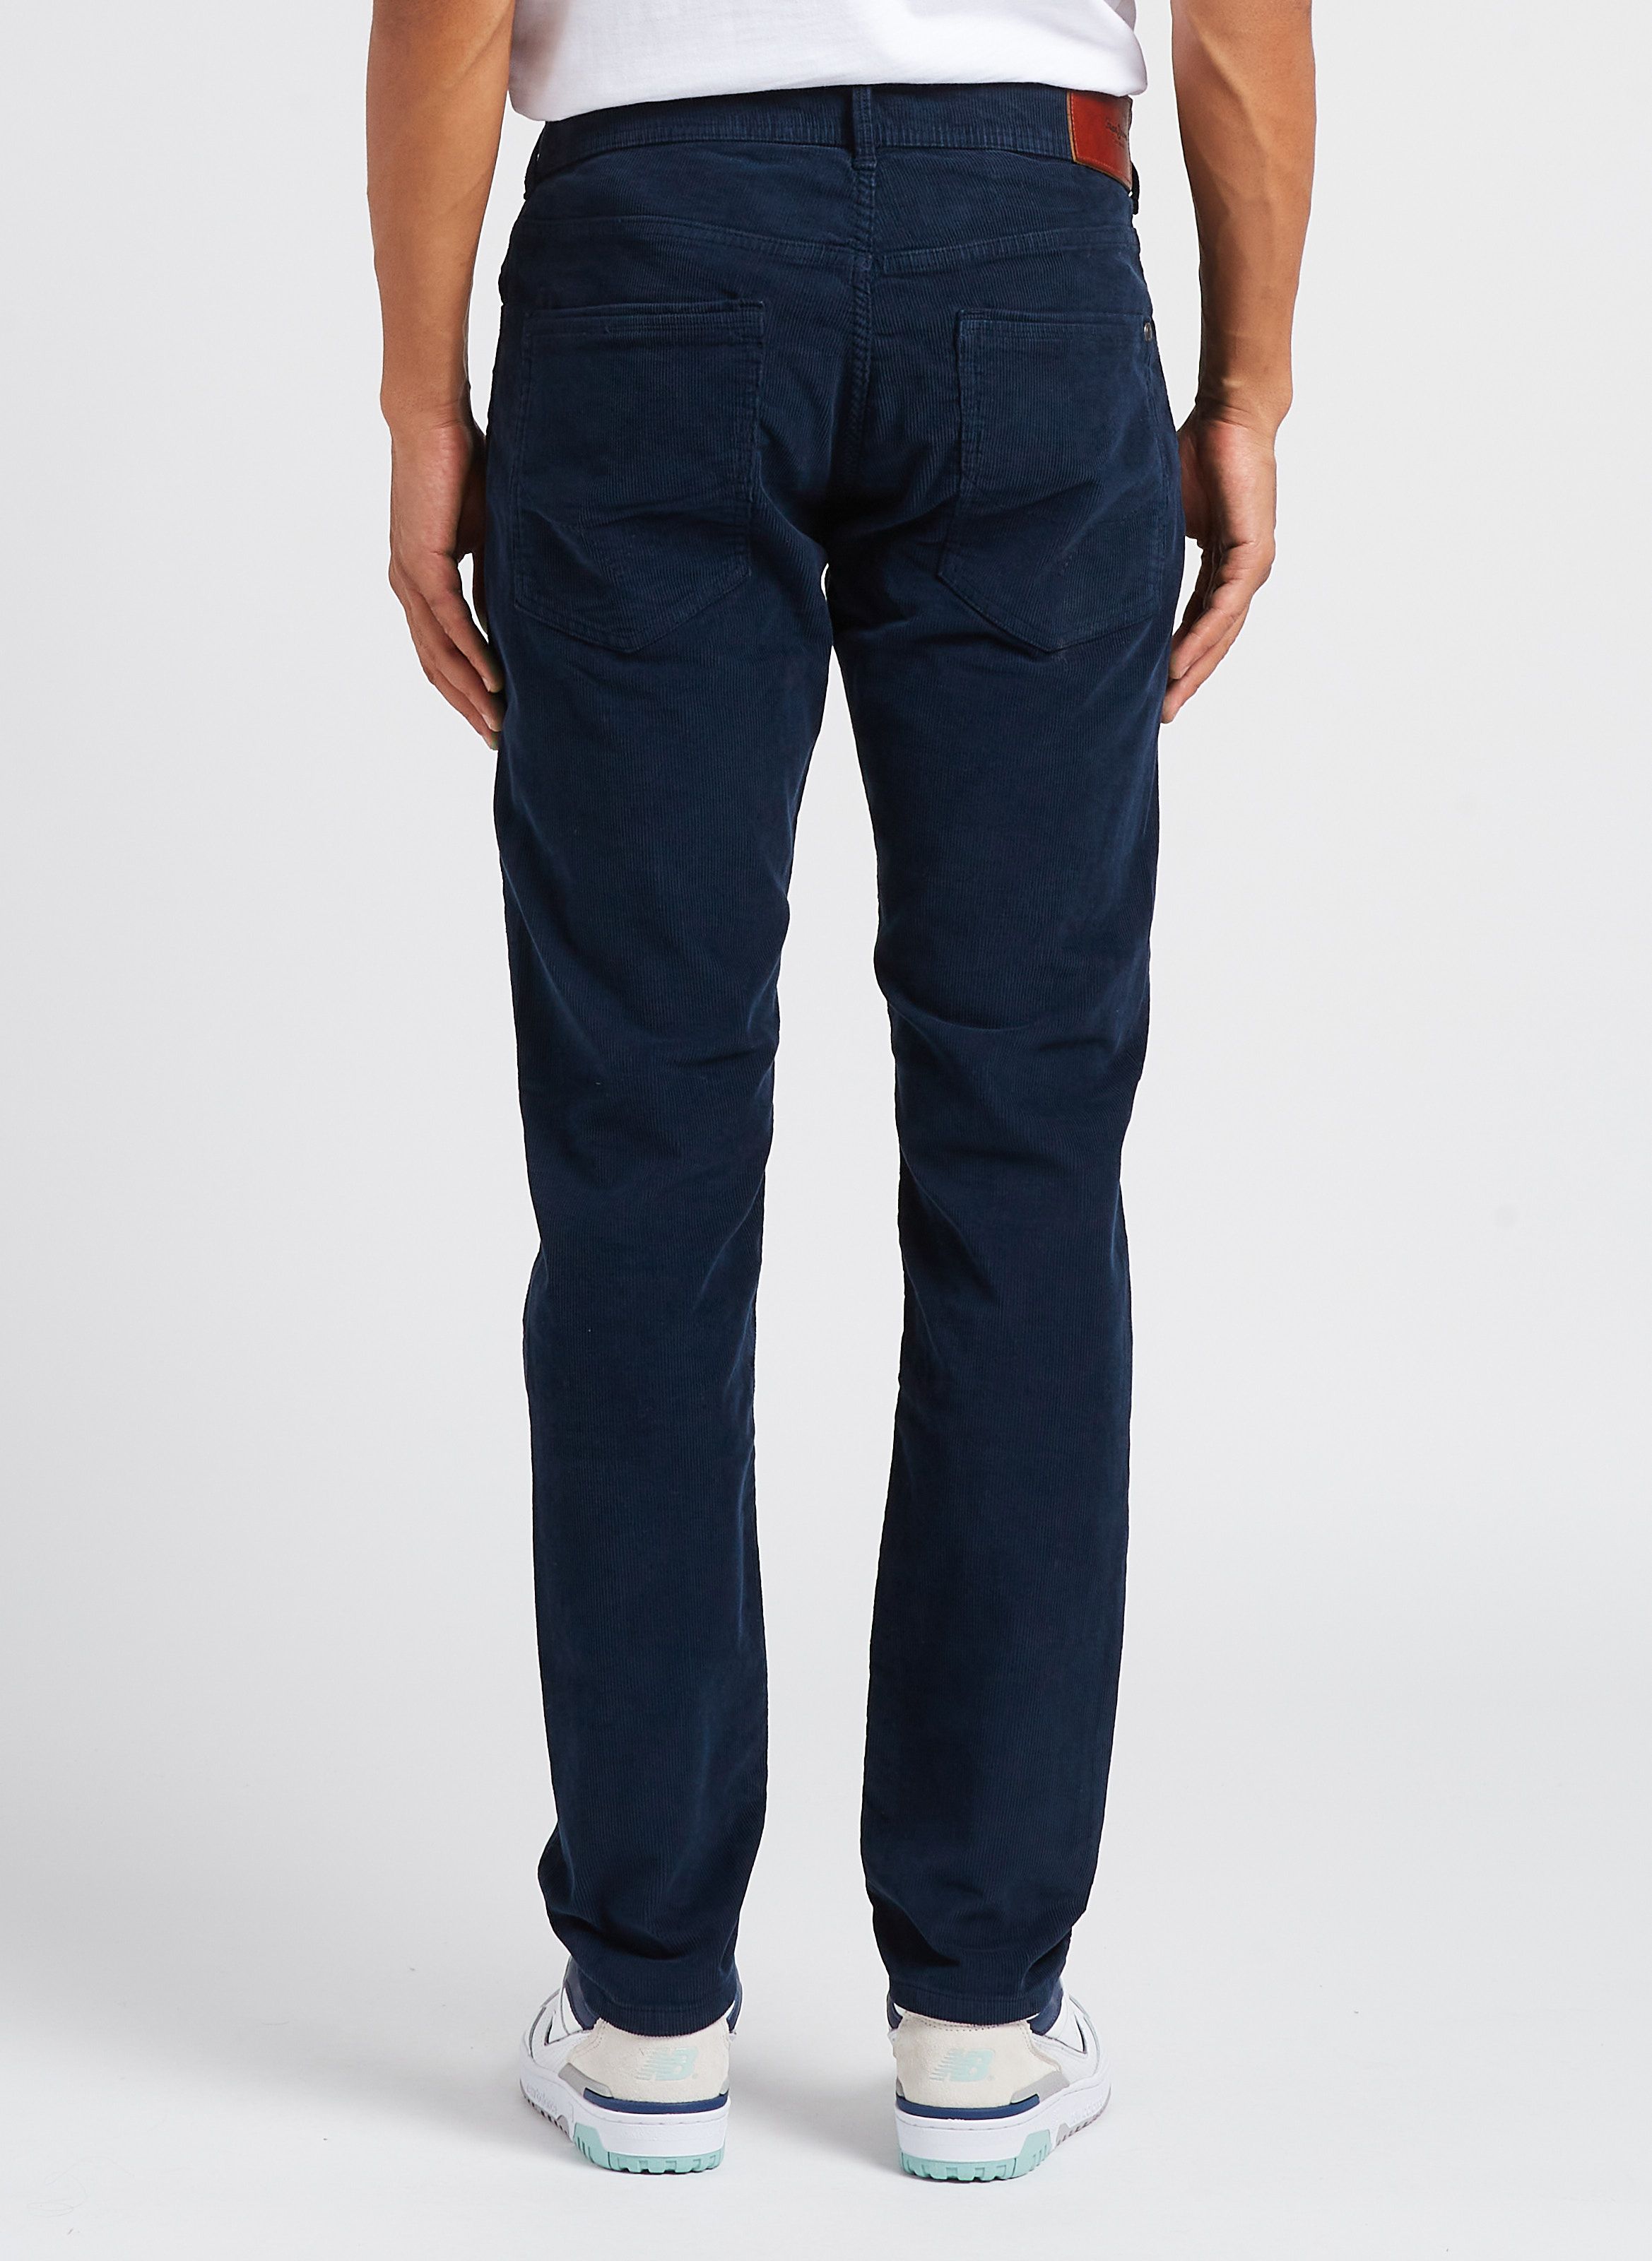 Women's pants Pepe Jeans Cecilia Cord - Trousers and Jeans - Woman -  Lifestyle